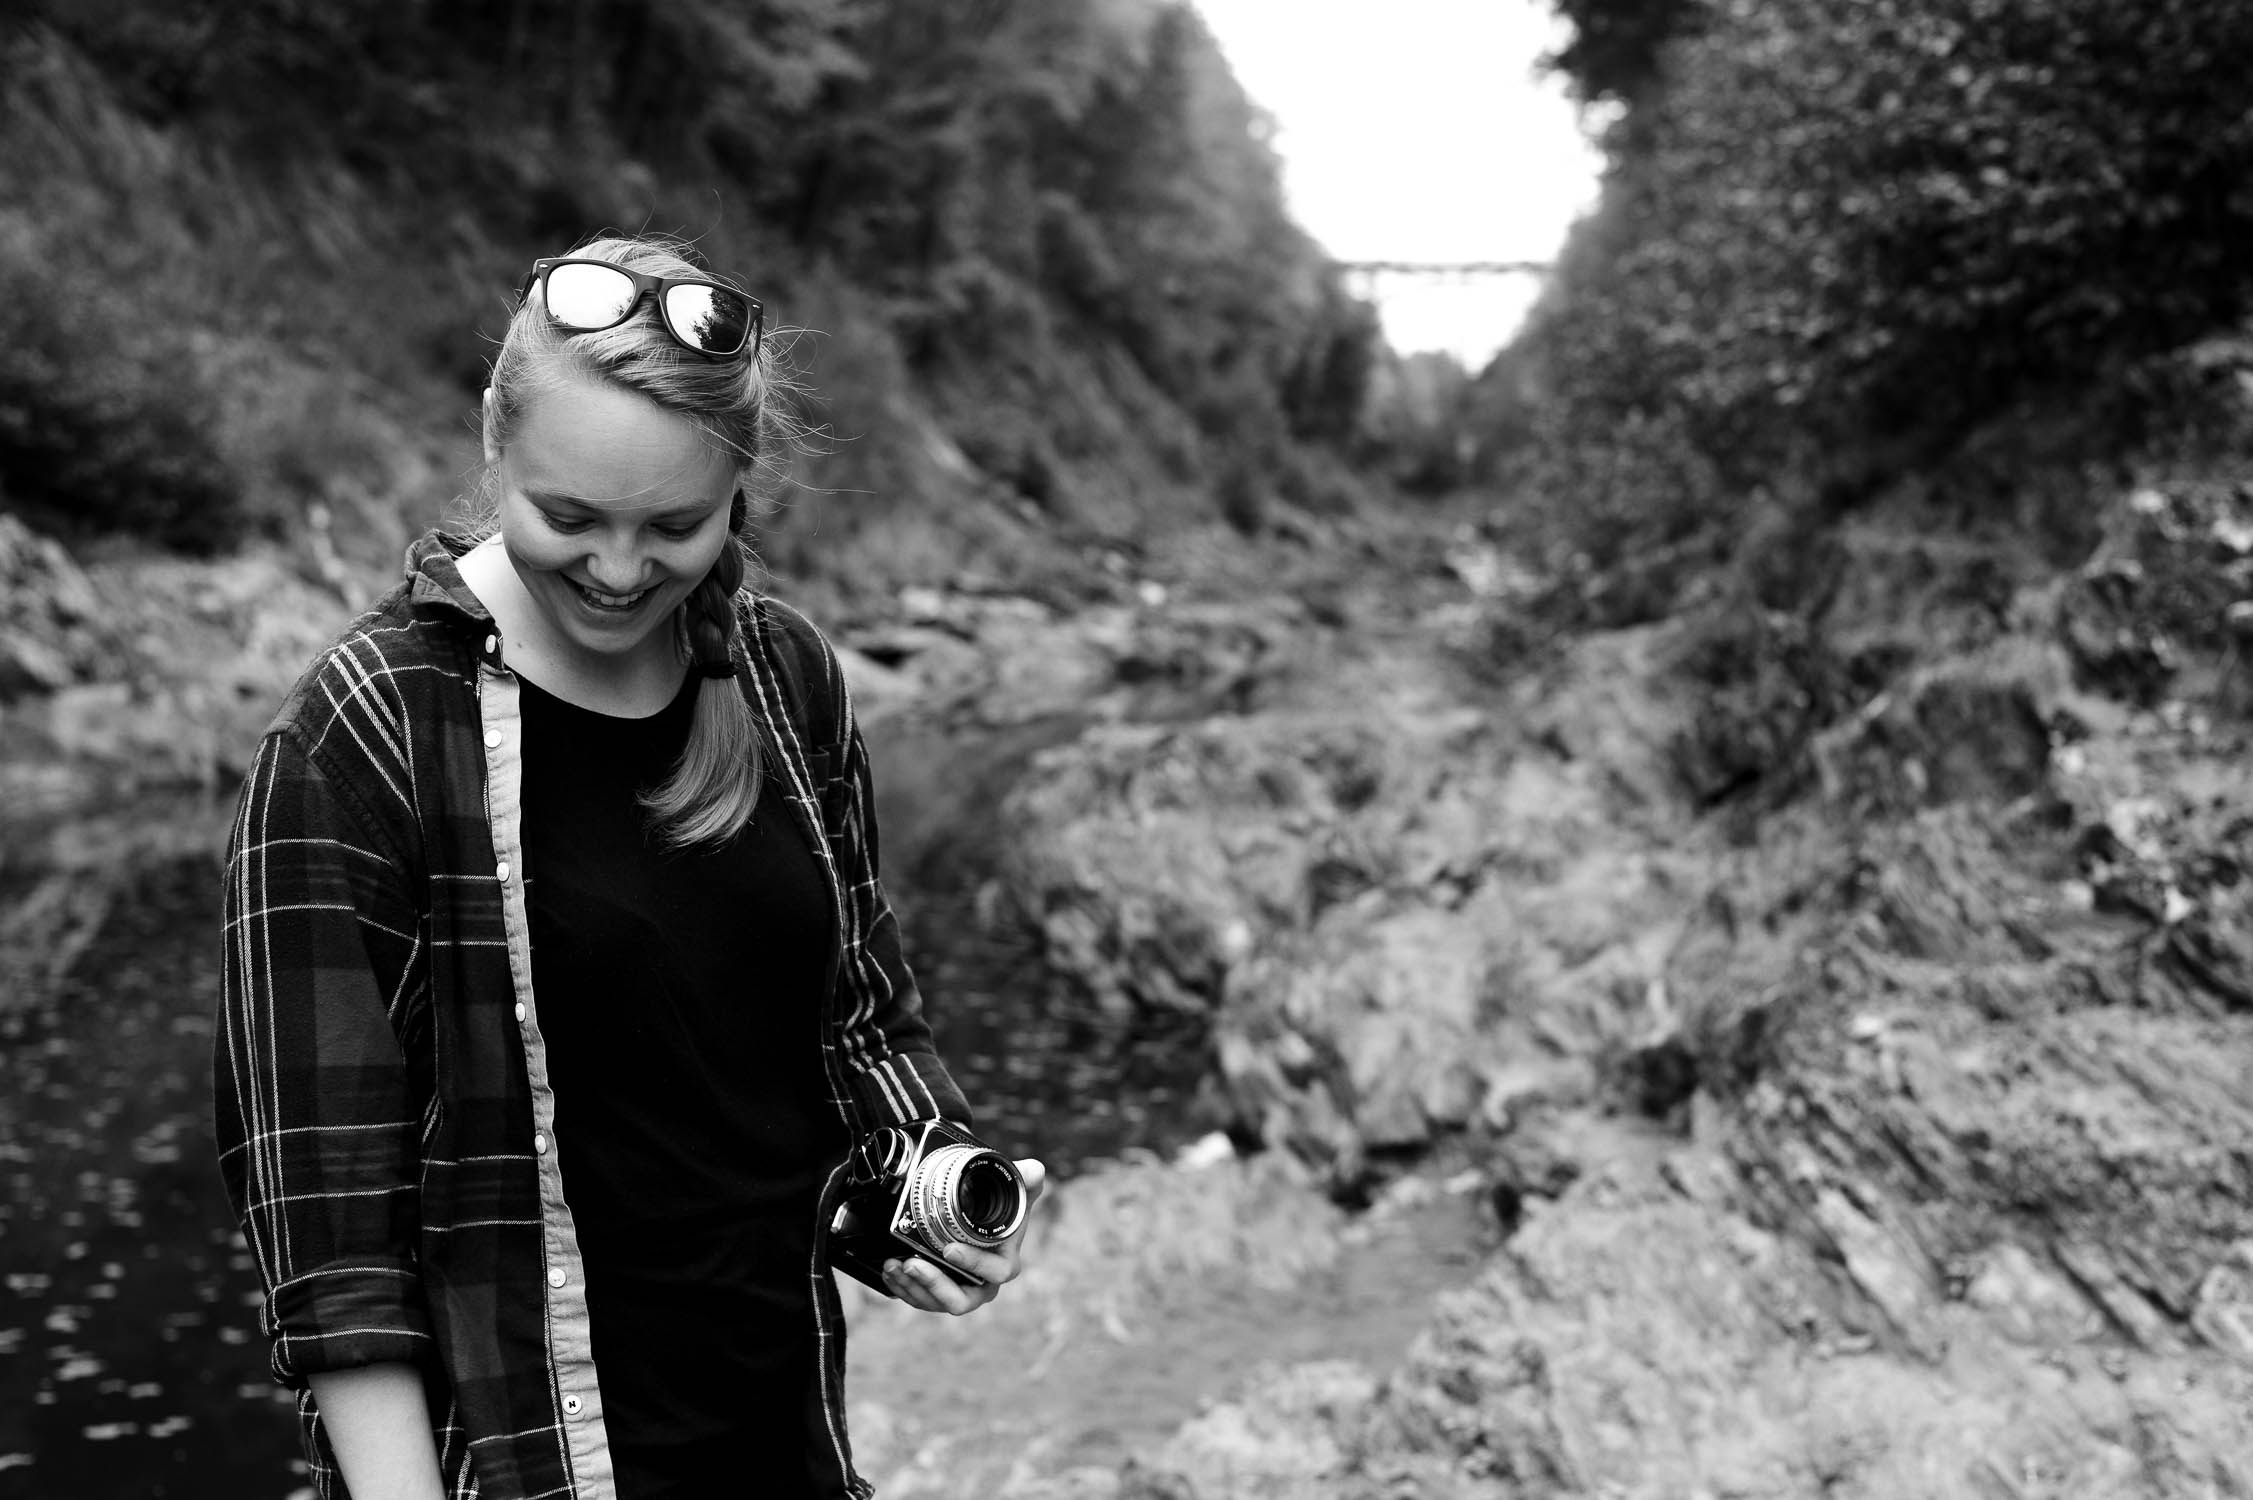 Amanda with a Hasselblad at Quechee Gorge